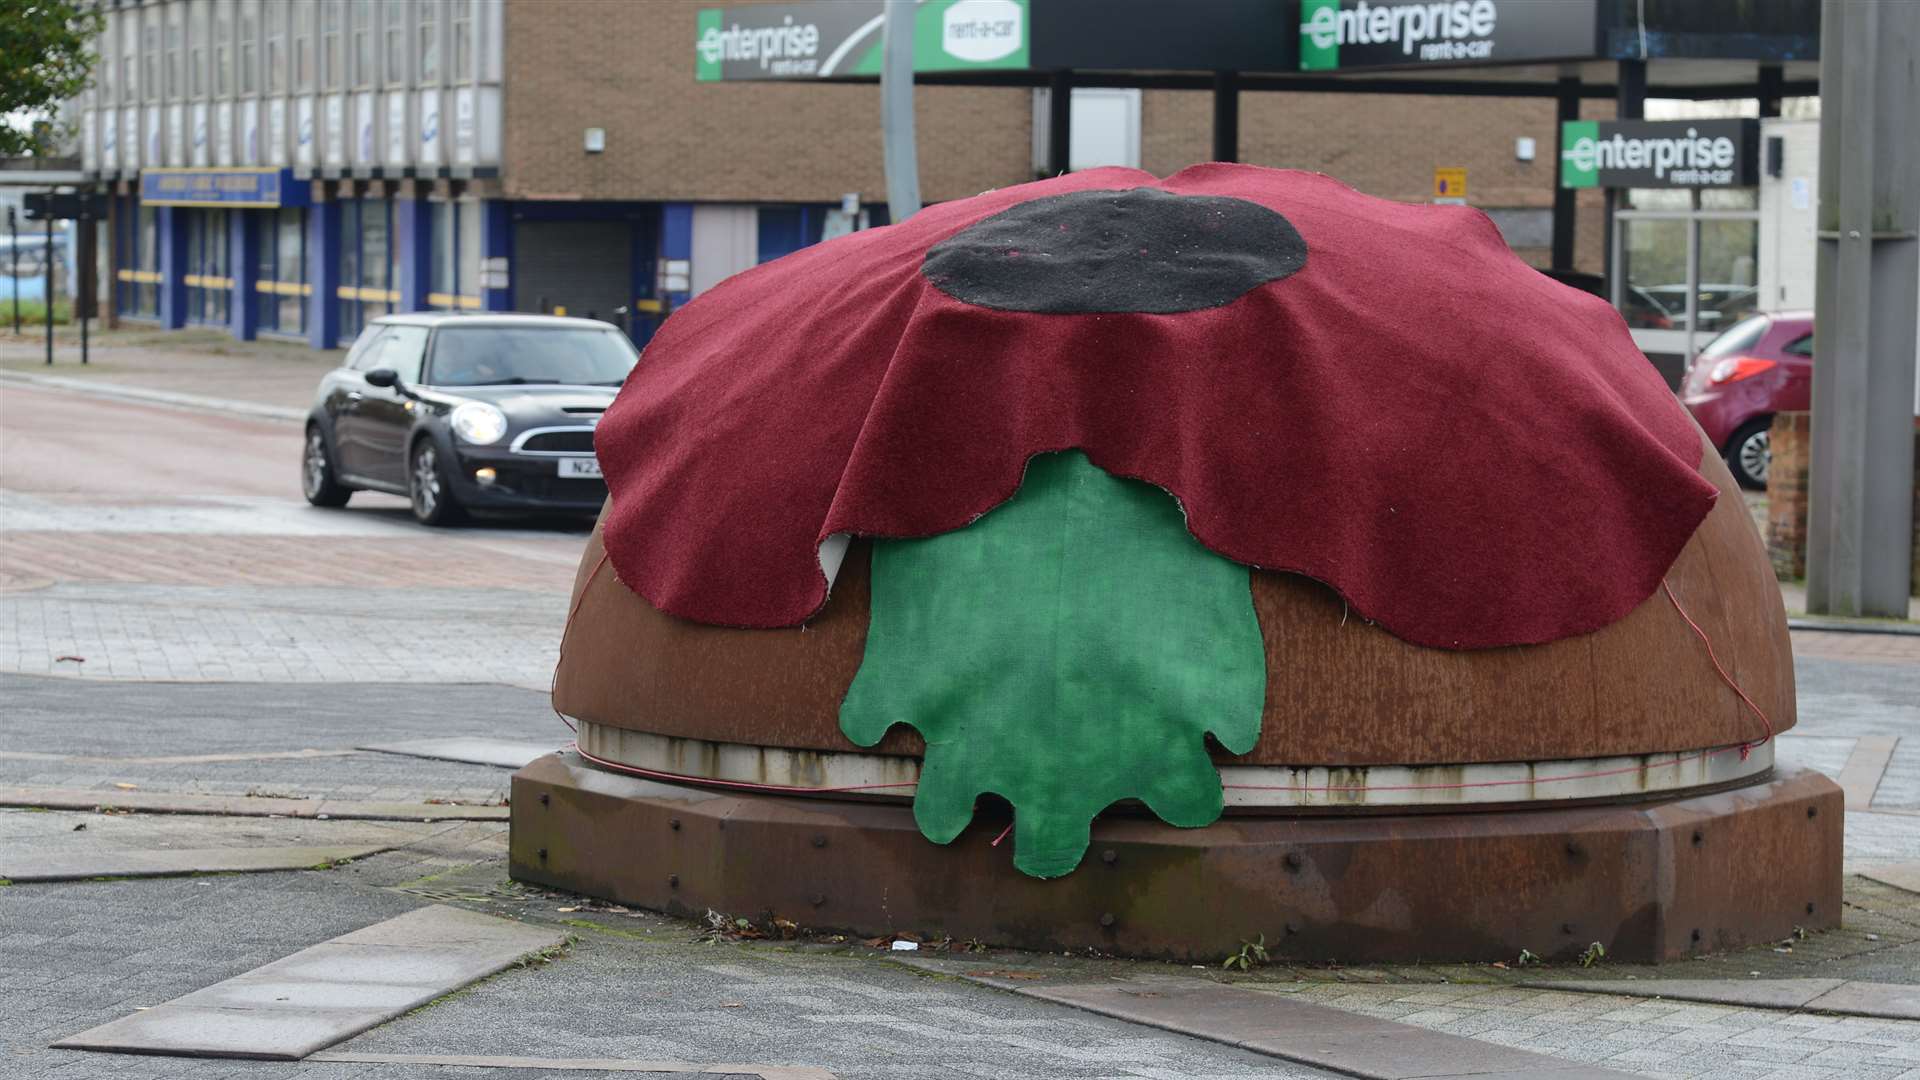 Ashford's bolt sculpture poppy tribute for Remembrance Day